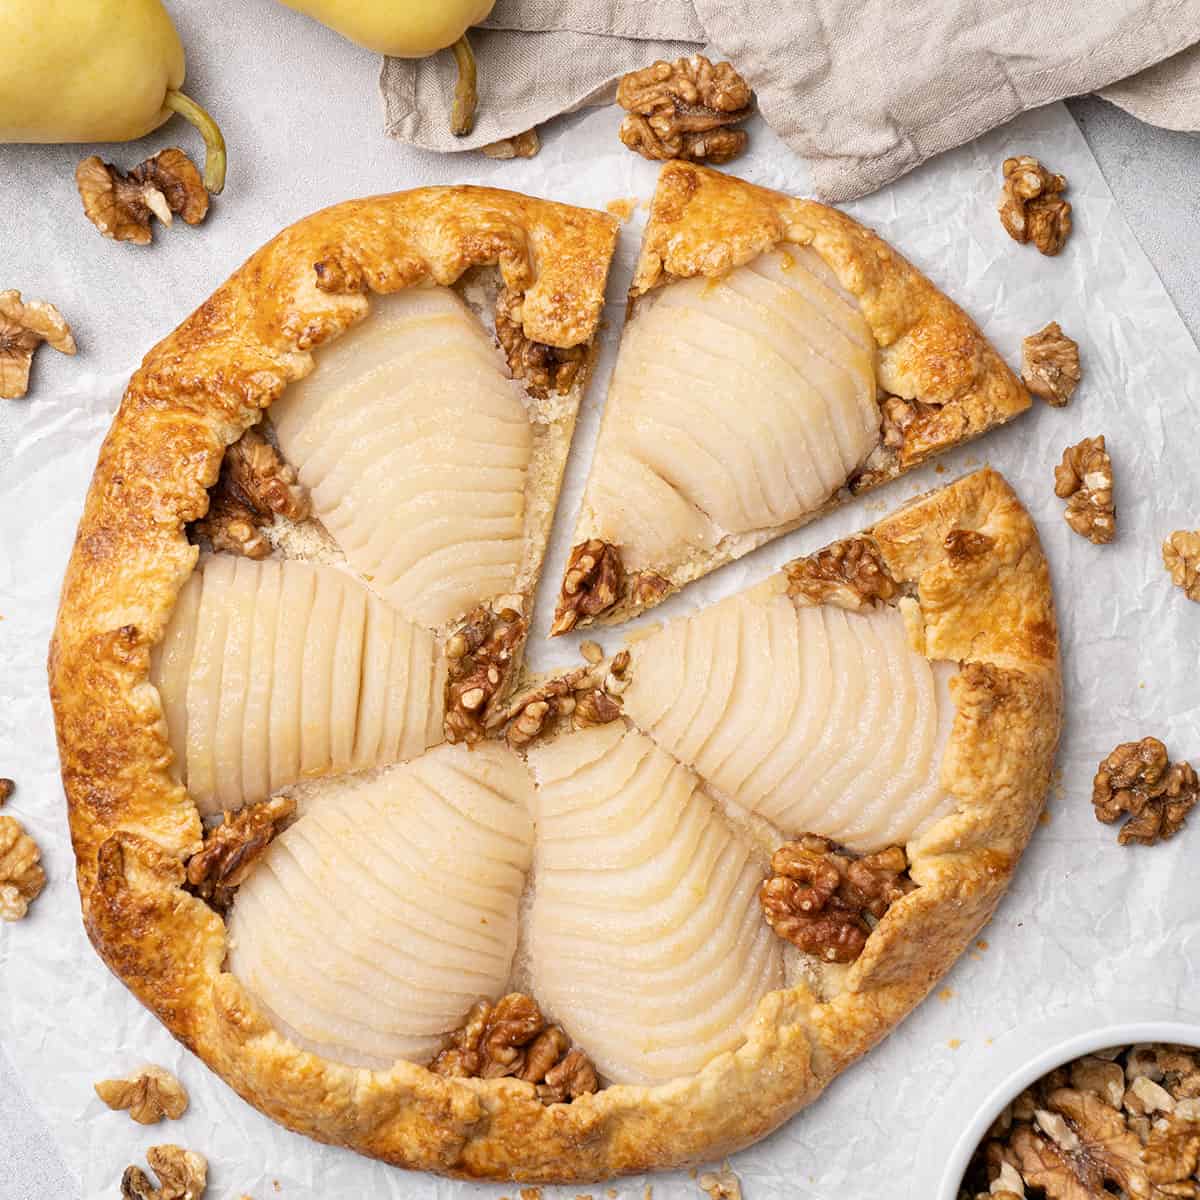 Pear galette decorated with walnuts.